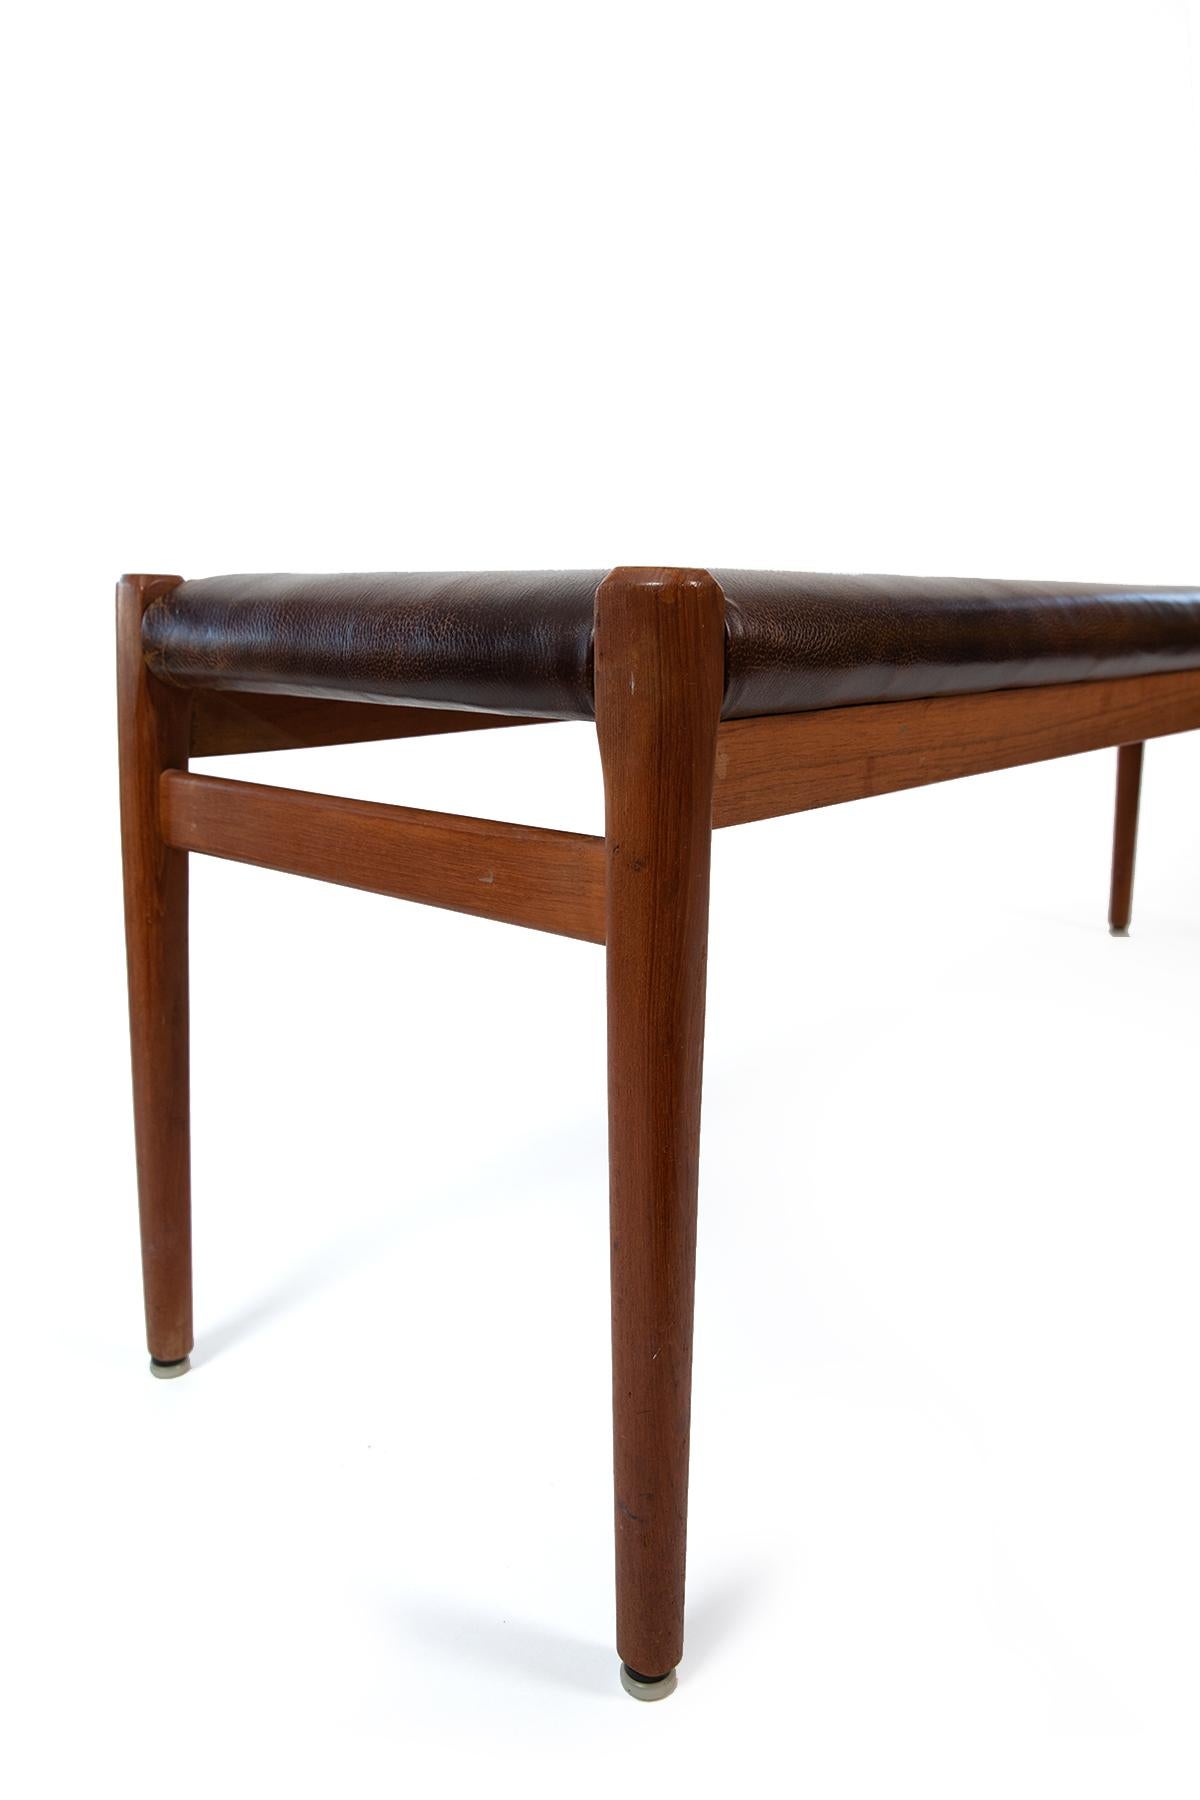 Mid-Century Modern Niels Moller Leather and Teak Bench